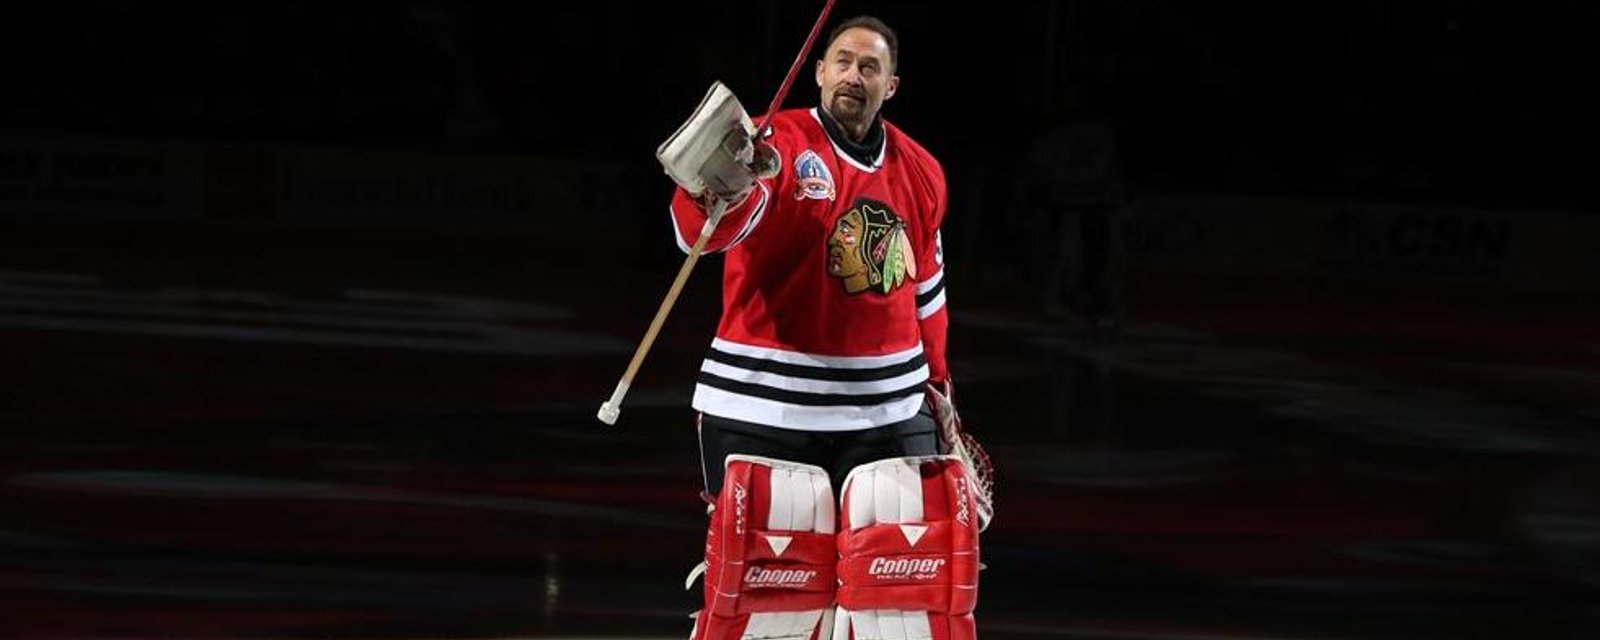 Hawks honor Ed Belfour in awesome way. 